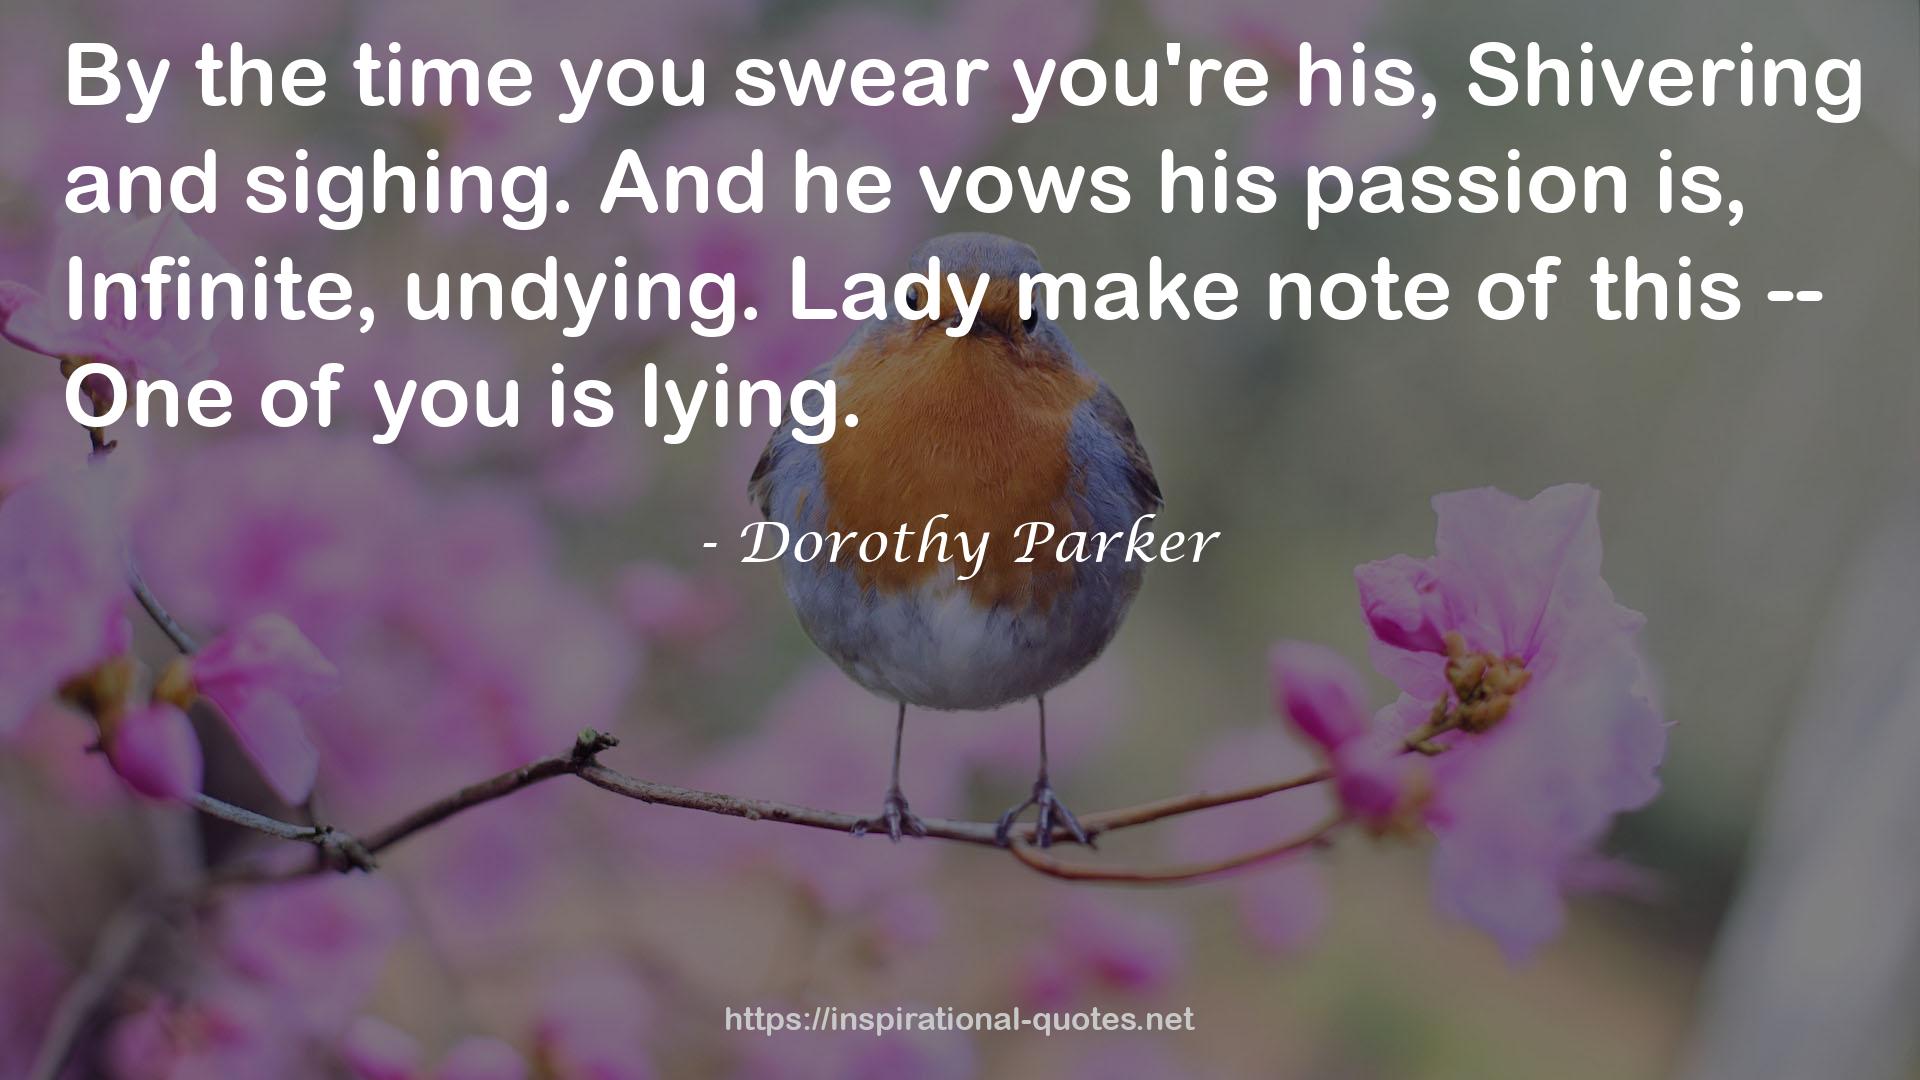 Dorothy Parker QUOTES